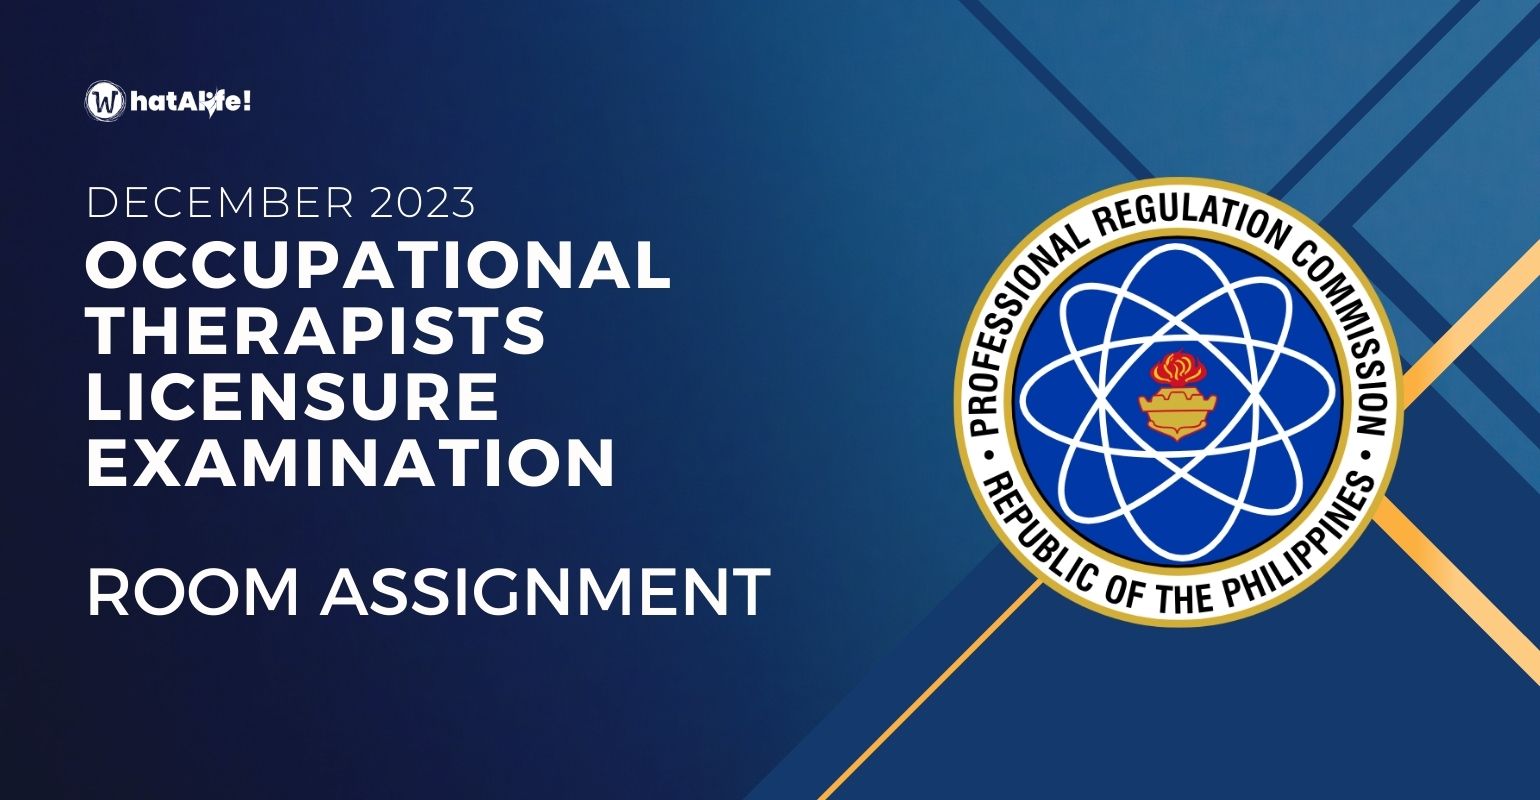 Room Assignment — December 2023 Occupational Therapists Licensure Exam